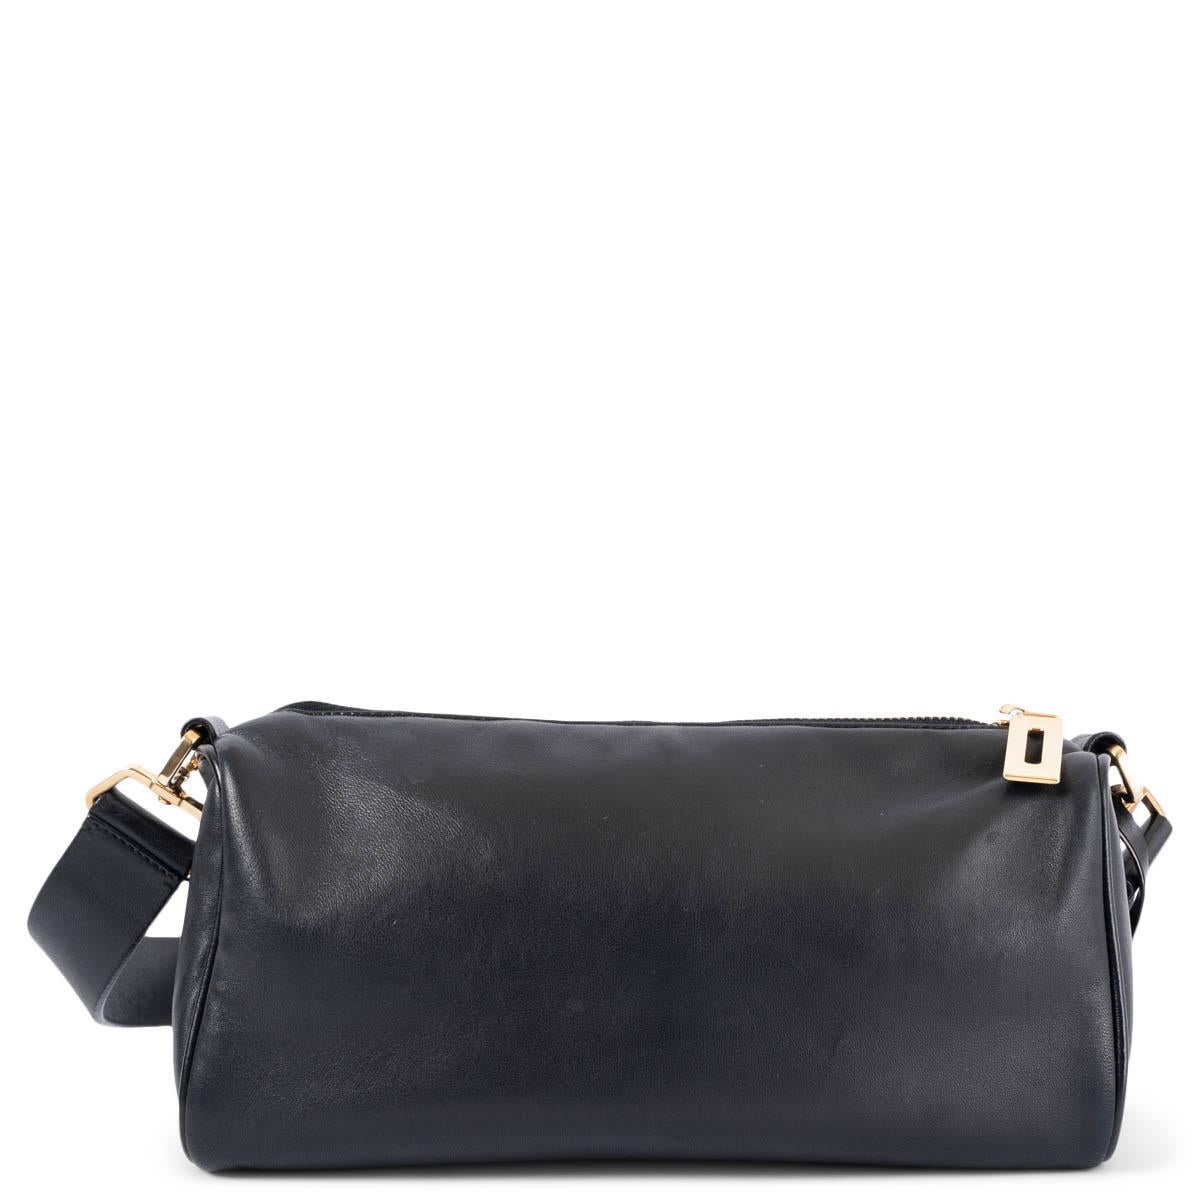 PRADA black Daino Box leather BOXY Shoulder Bag BR0094 In Excellent Condition For Sale In Zürich, CH